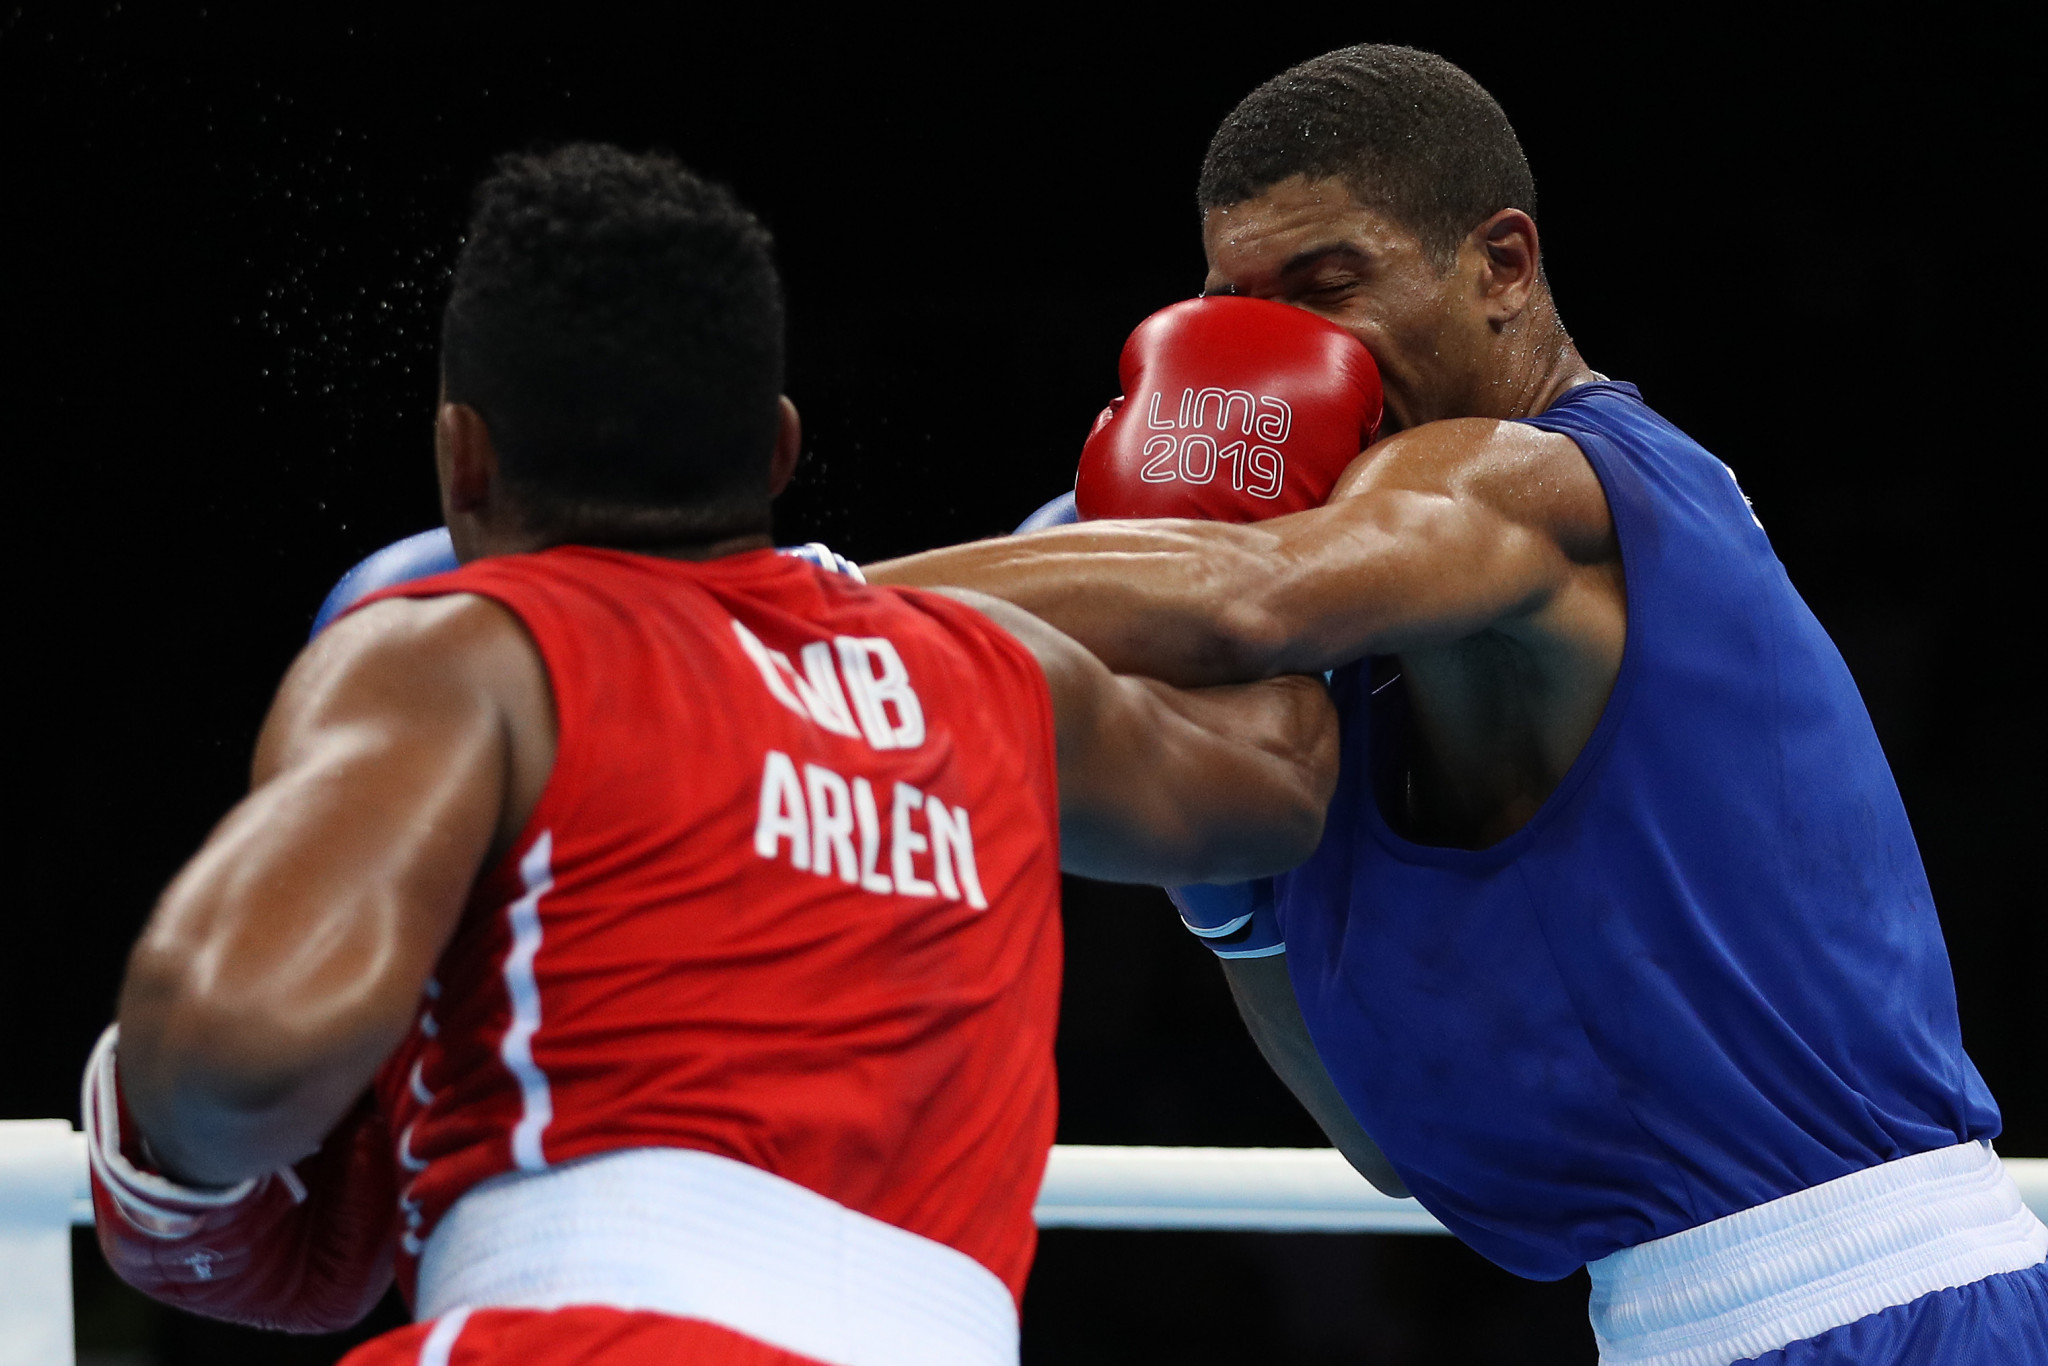 Cuban boxing supremacy sealed with four further gold medals at Lima 2019